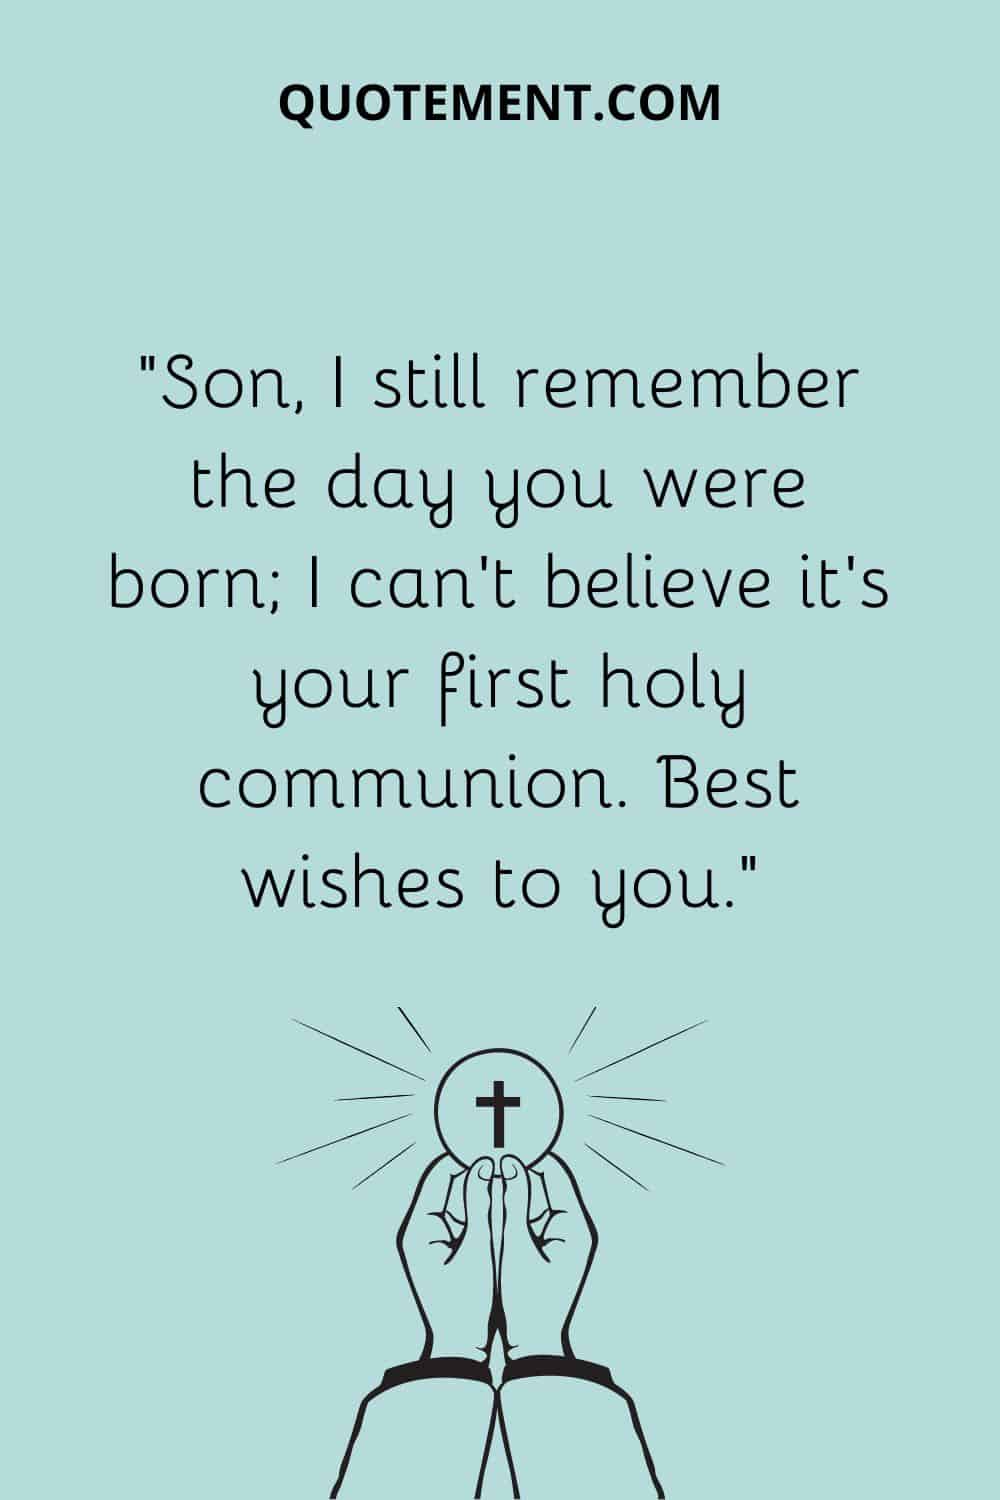 “Son, I still remember the day you were born; I can’t believe it’s your first holy communion. Best wishes to you.”